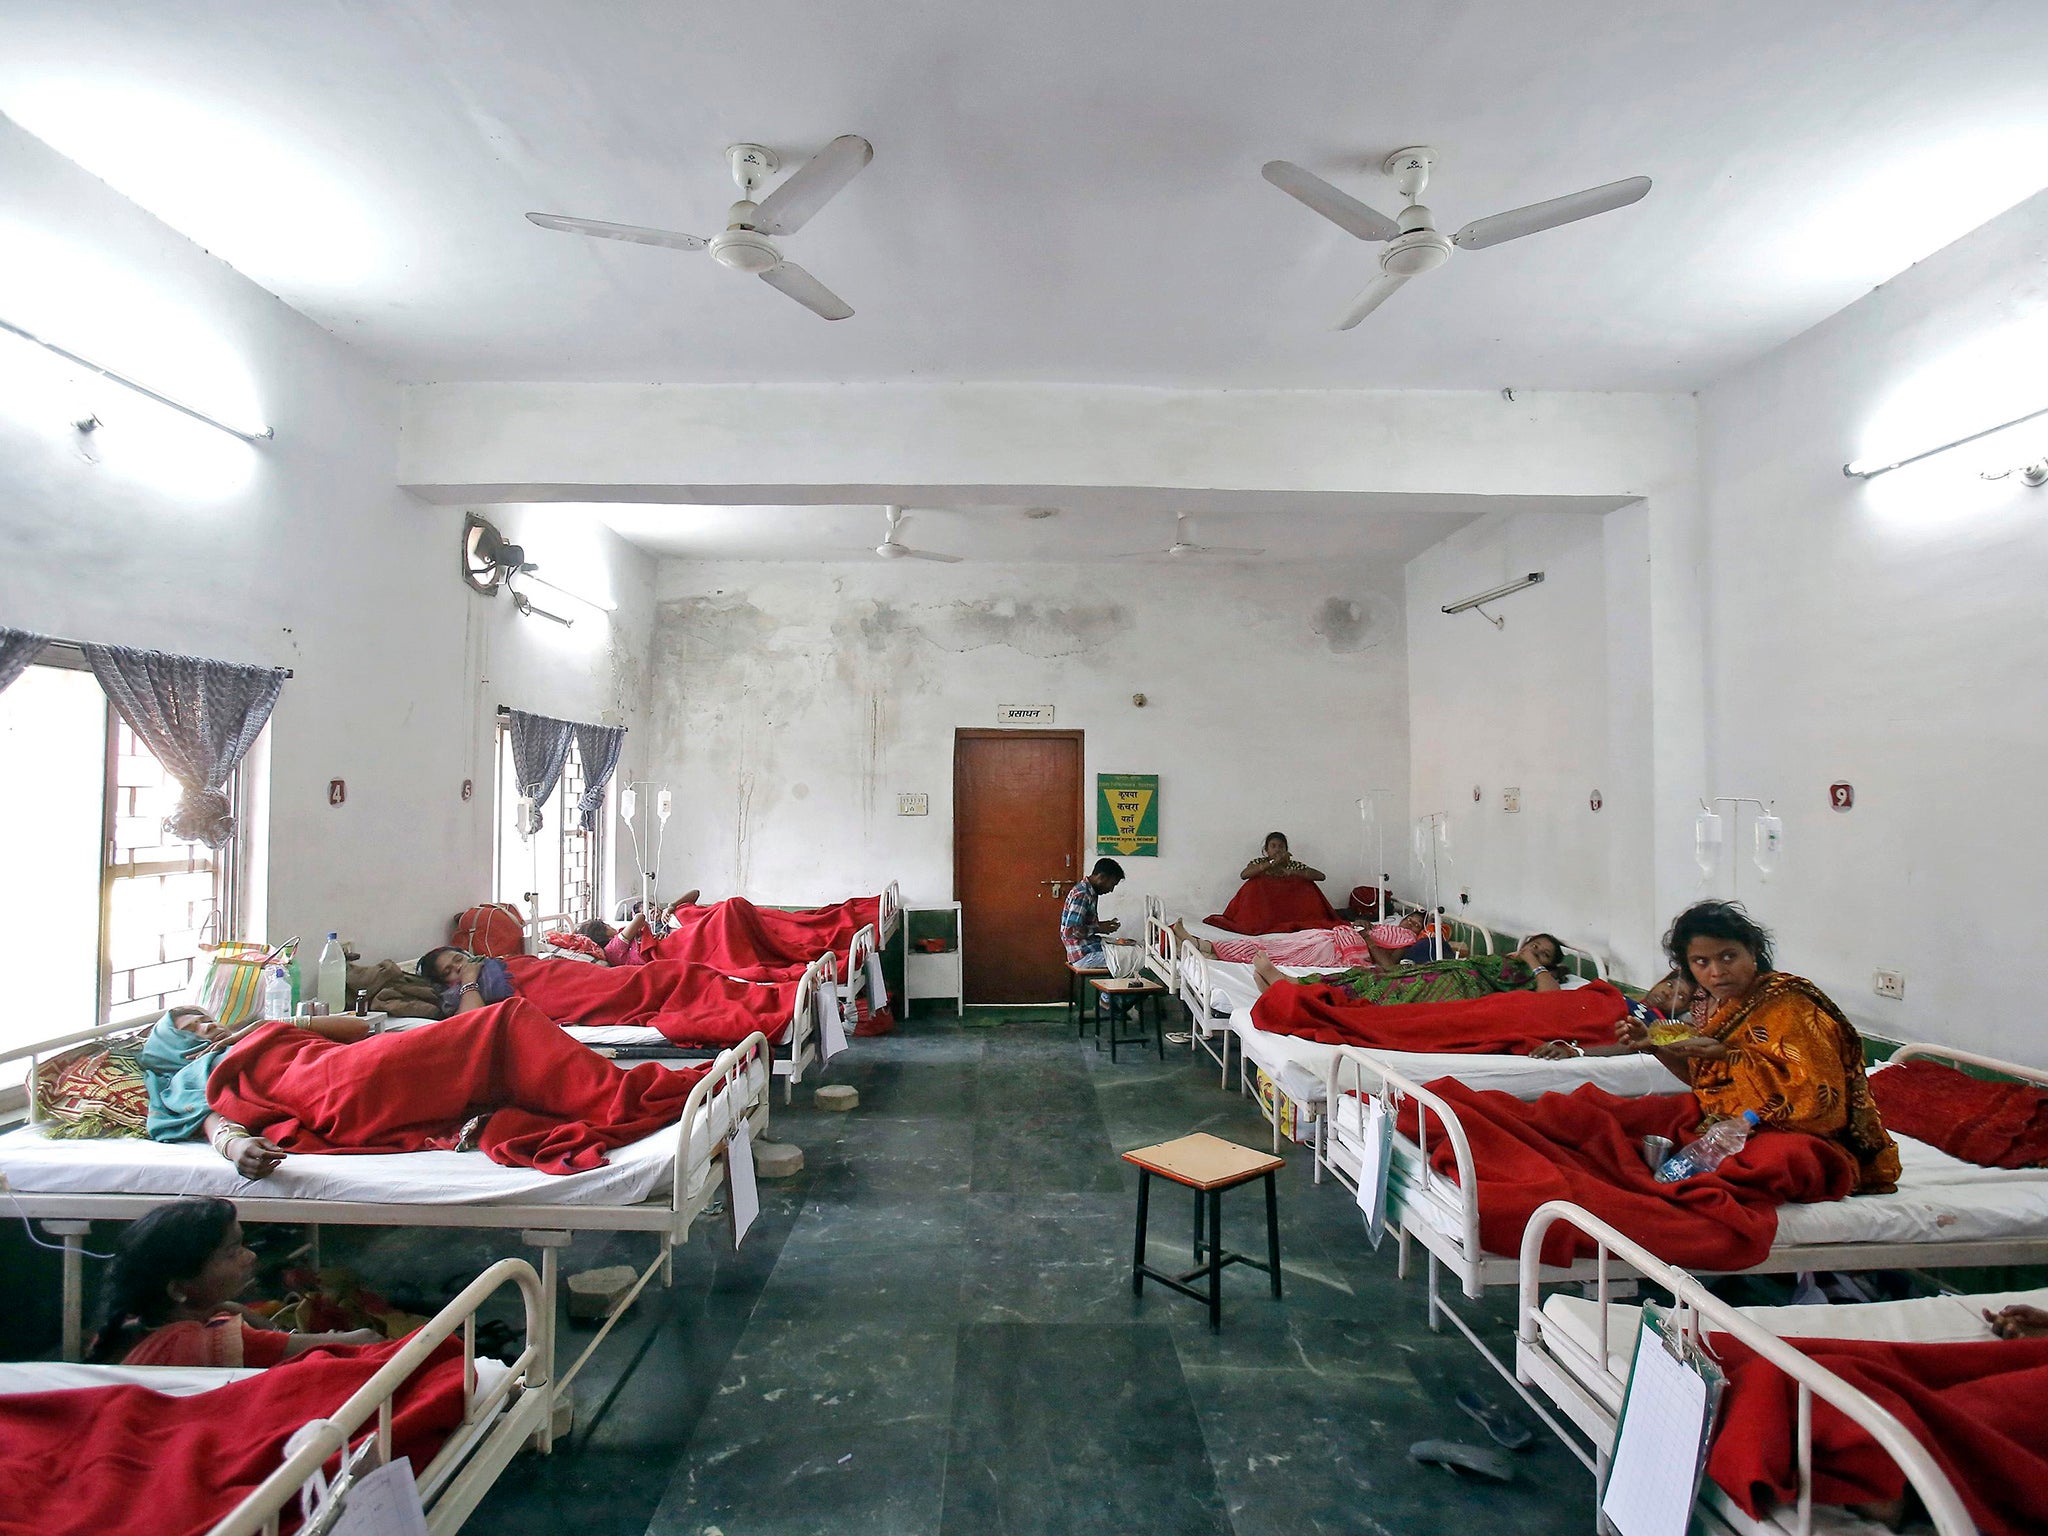 Women, who underwent a sterilization surgery at a government mass sterilisation "camp", lie in hospital beds for treatment at Chhattisgarh Institute of Medical Sciences (CIMS) hospital in Bilaspur, in the eastern Indian state of Chhattisgarh